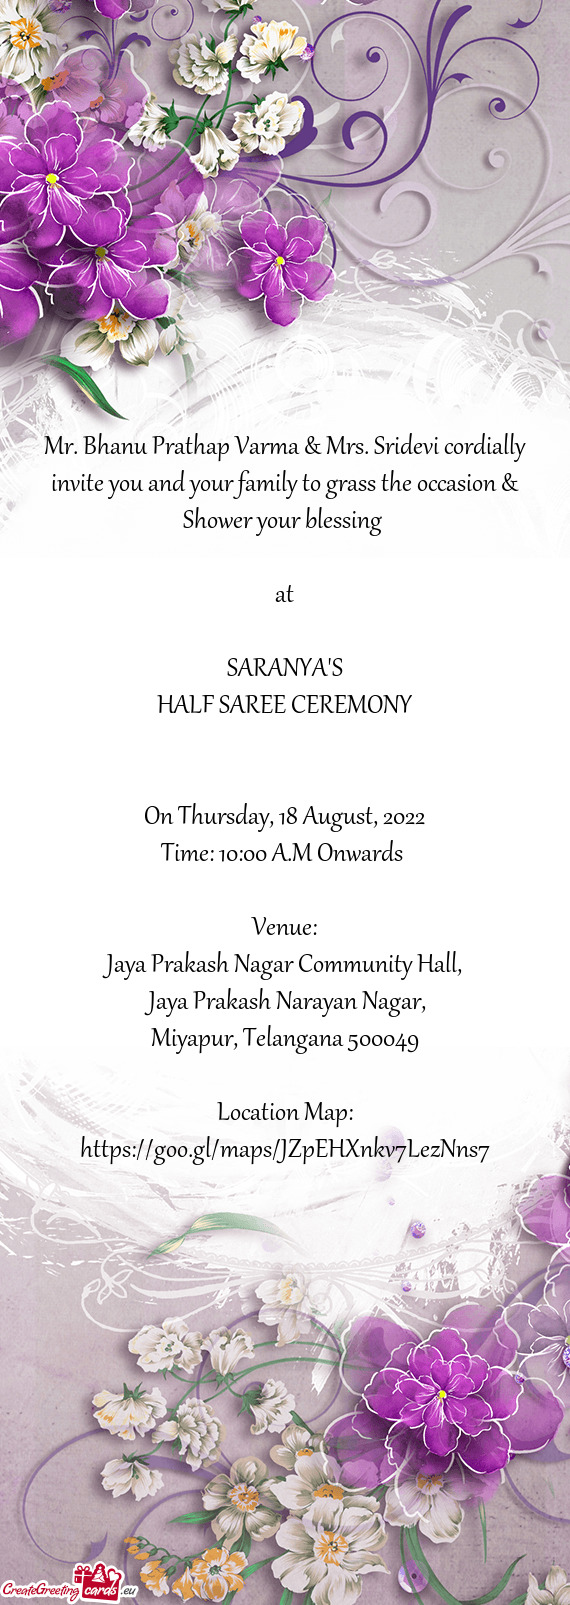 Mr. Bhanu Prathap Varma & Mrs. Sridevi cordially invite you and your family to grass the occasion &